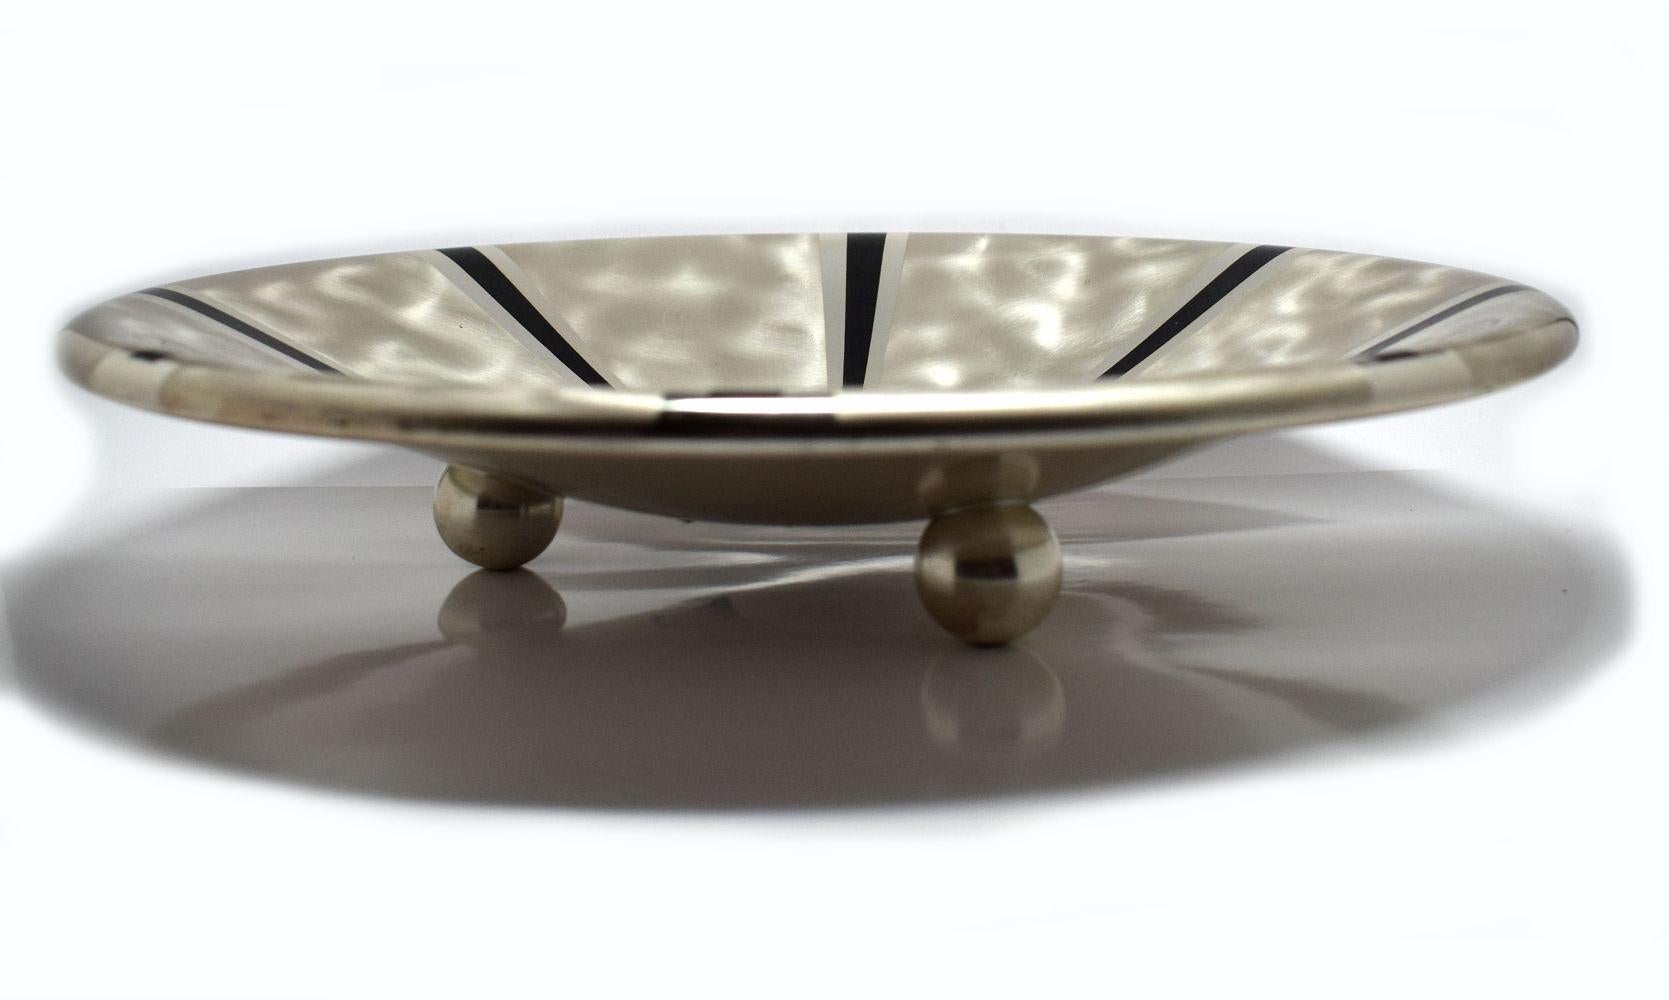 Art Deco Wmf Silver Plated Bowl In Good Condition For Sale In Devon, England